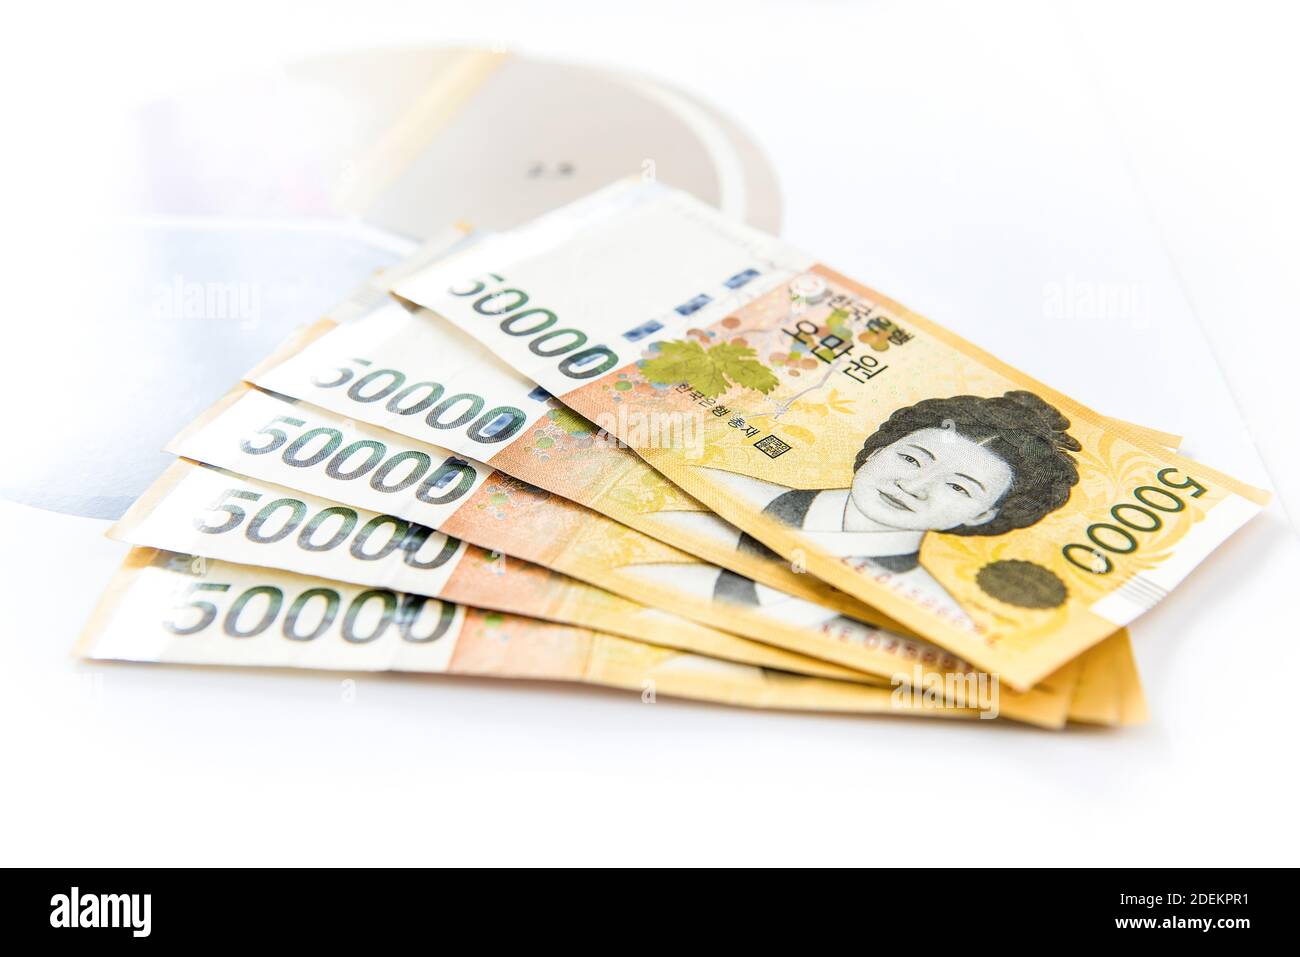 Thousands of South Korean won money in form of banknotes on paper with blurred pie chart in  background Stock Photo